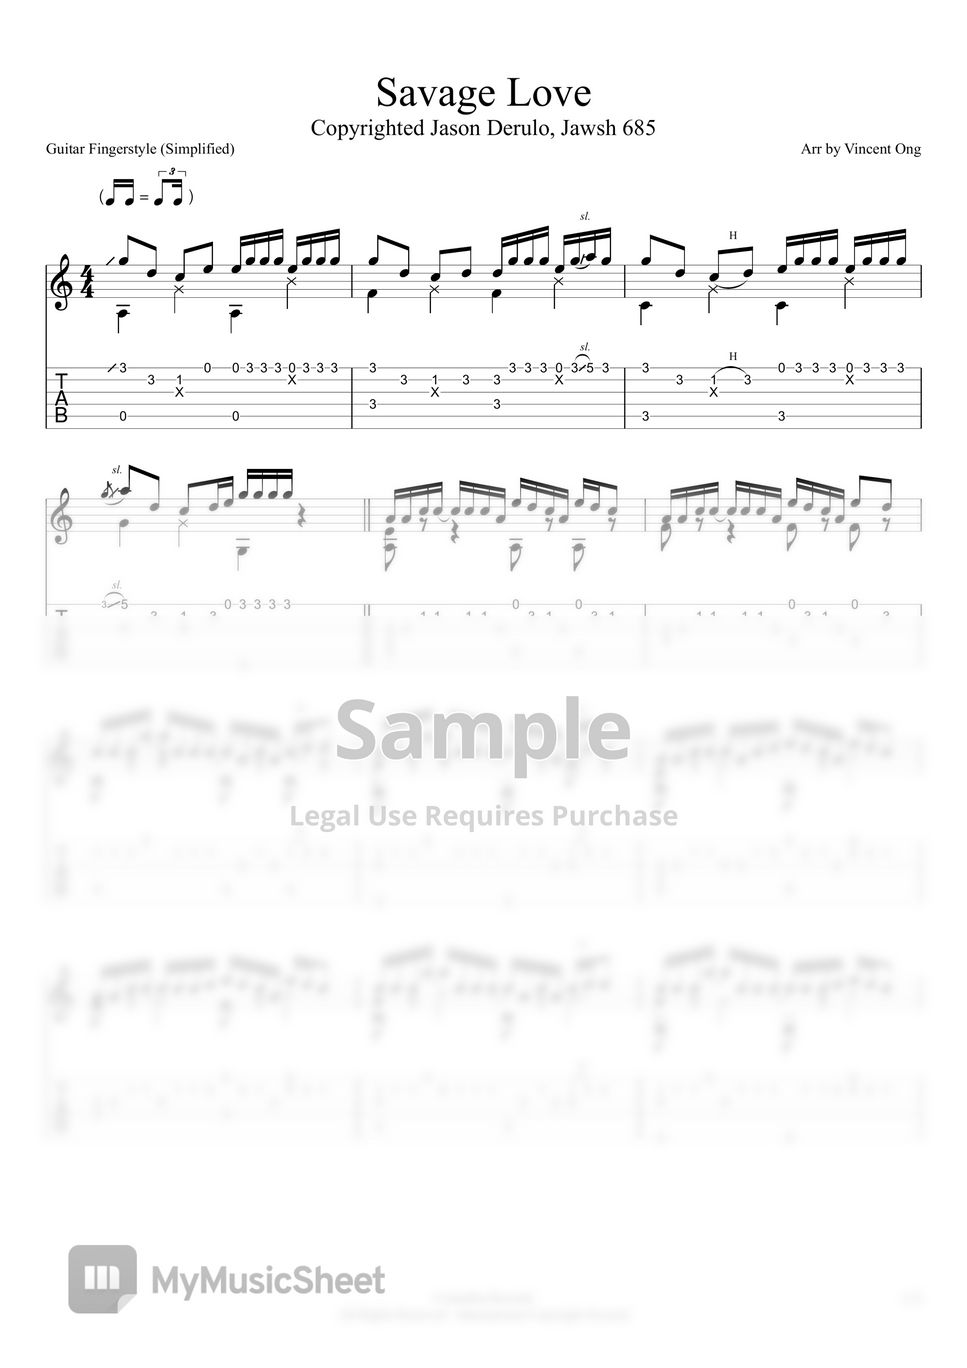 Jason Derulo Savage Love Guitar Solo Tab 1staff By Vincent Ong 